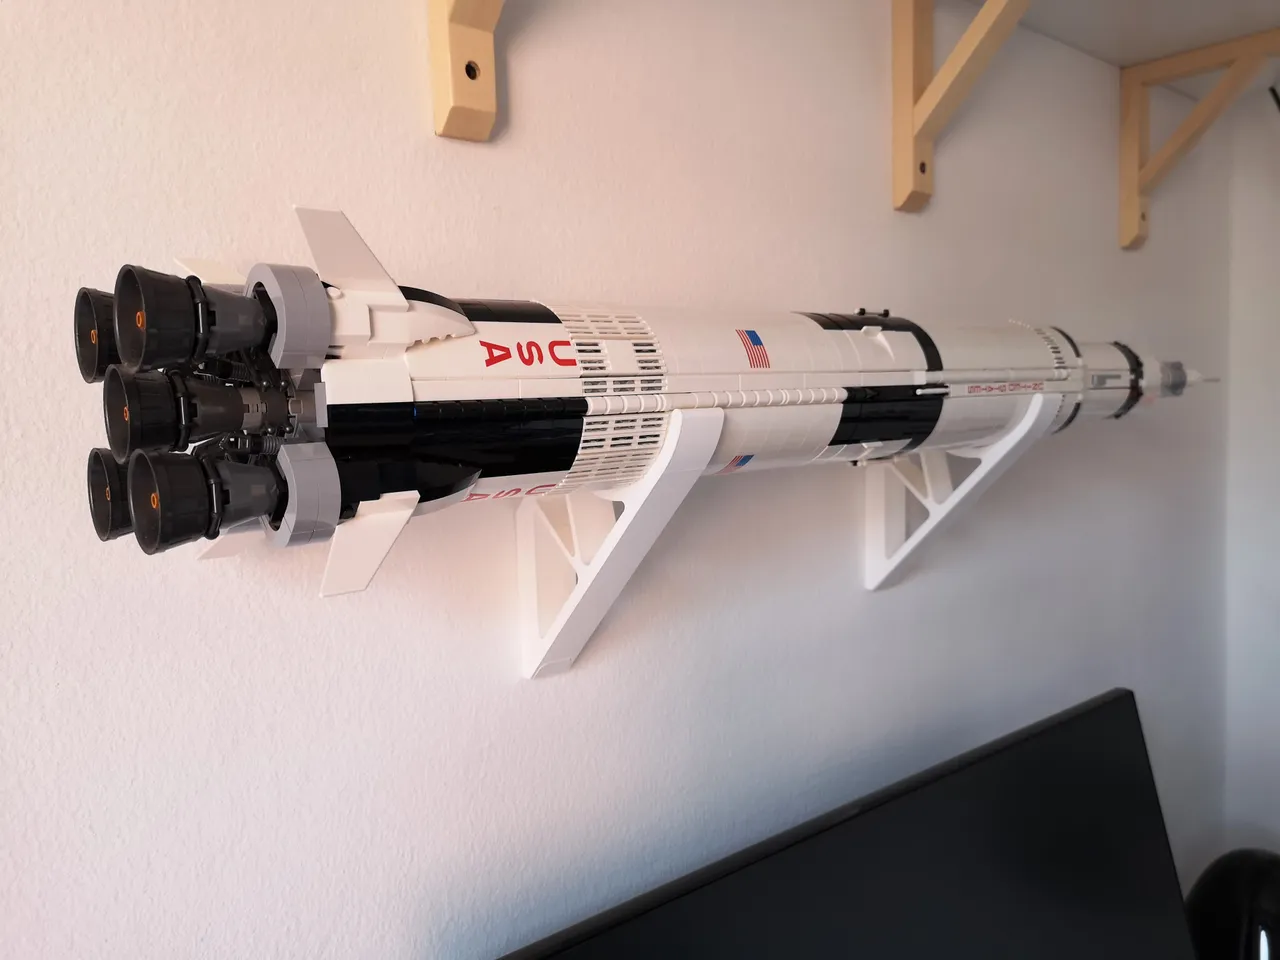 LEGO Saturn V wall hooks (front support now available) by steair, Download  free STL model